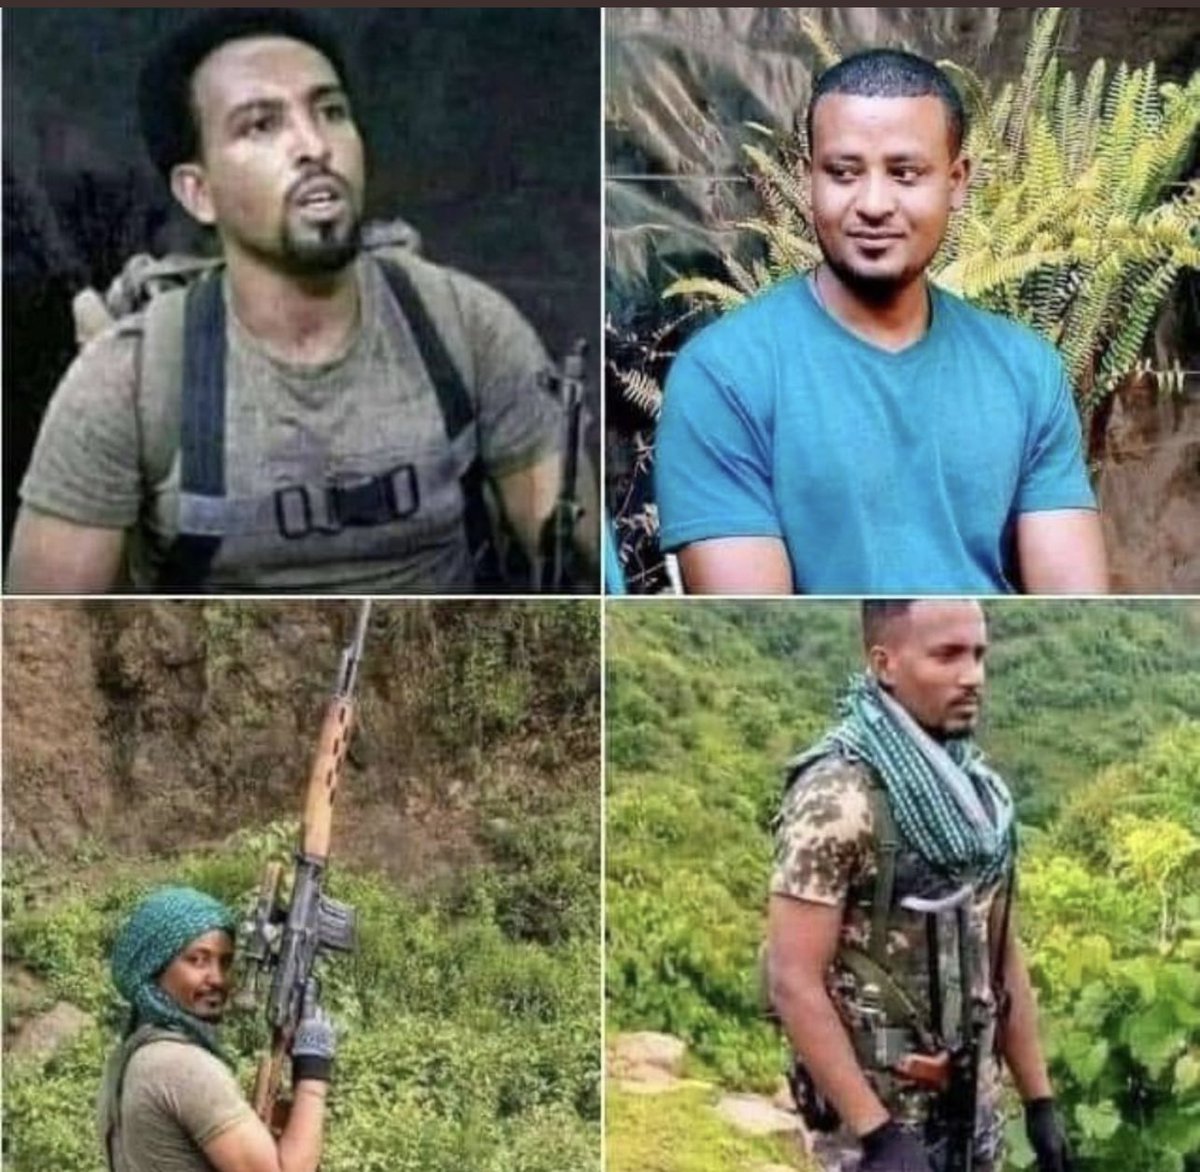 Our FANOs, Militias, Special forces didn't sacrifice their life for the current gov't to negotiate with #TPLFTerroristGroup. The negotiation is null and void for us. #JusticeNotNegotiation #AmharaRevolution @DemekeHasen @AMECOONLINE @_AfricanUnion @UN @AbiyAhmedAli https://t.co/iuO8gKcXX6